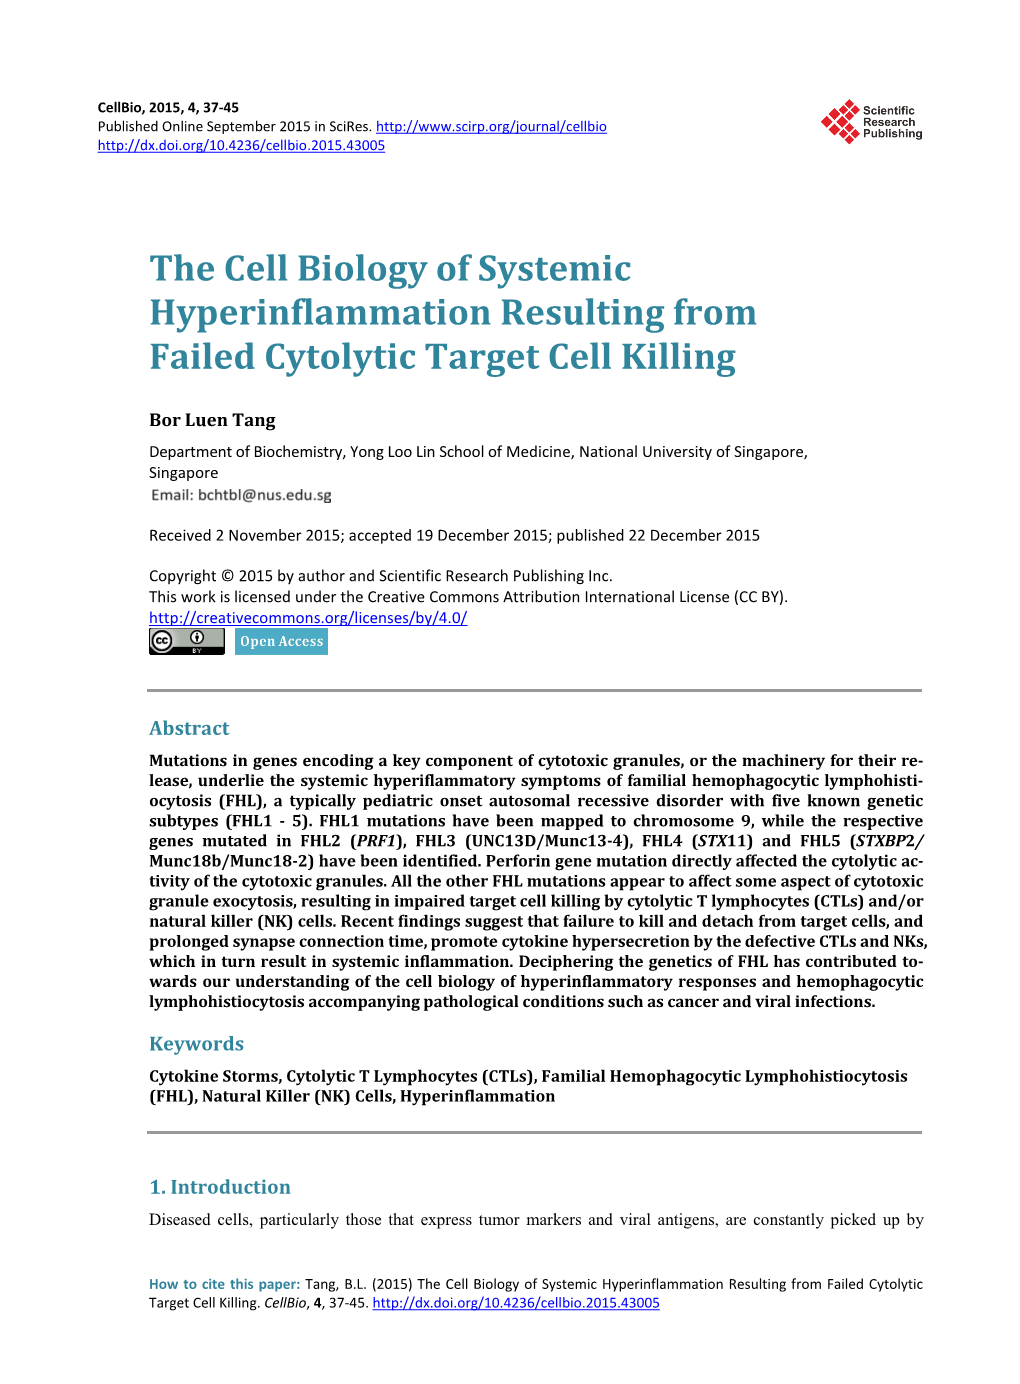 The Cell Biology of Systemic Hyperinflammation Resulting from Failed Cytolytic Target Cell Killing